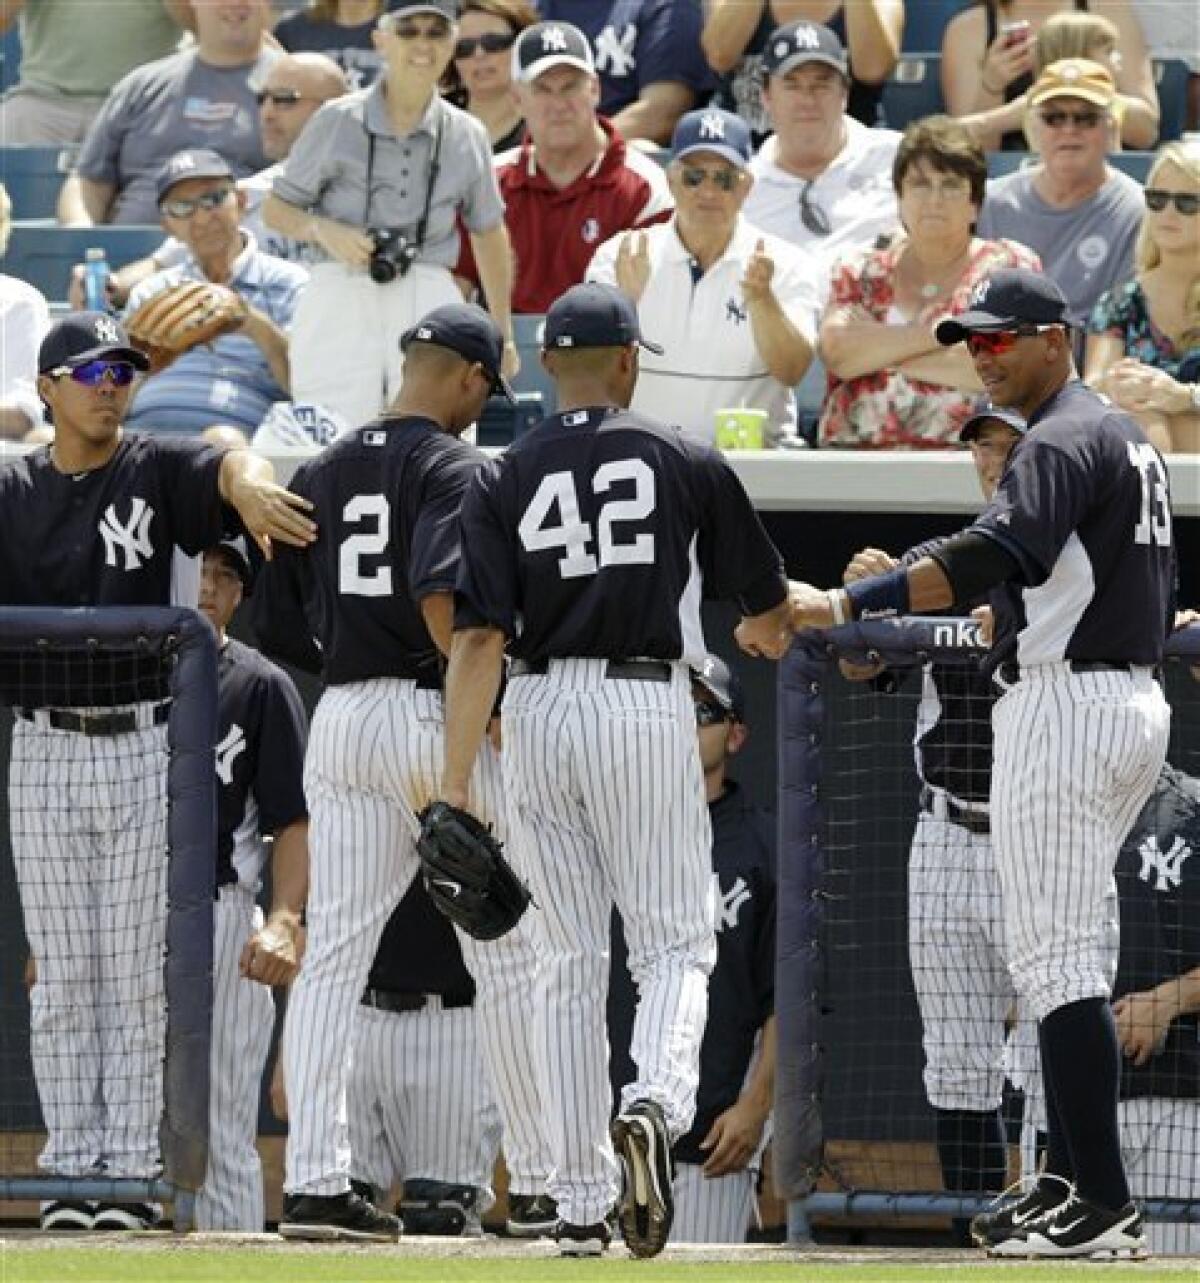 Derek Jeter says of Mariano Rivera: 'He'll be back' with Yankees in 2012 